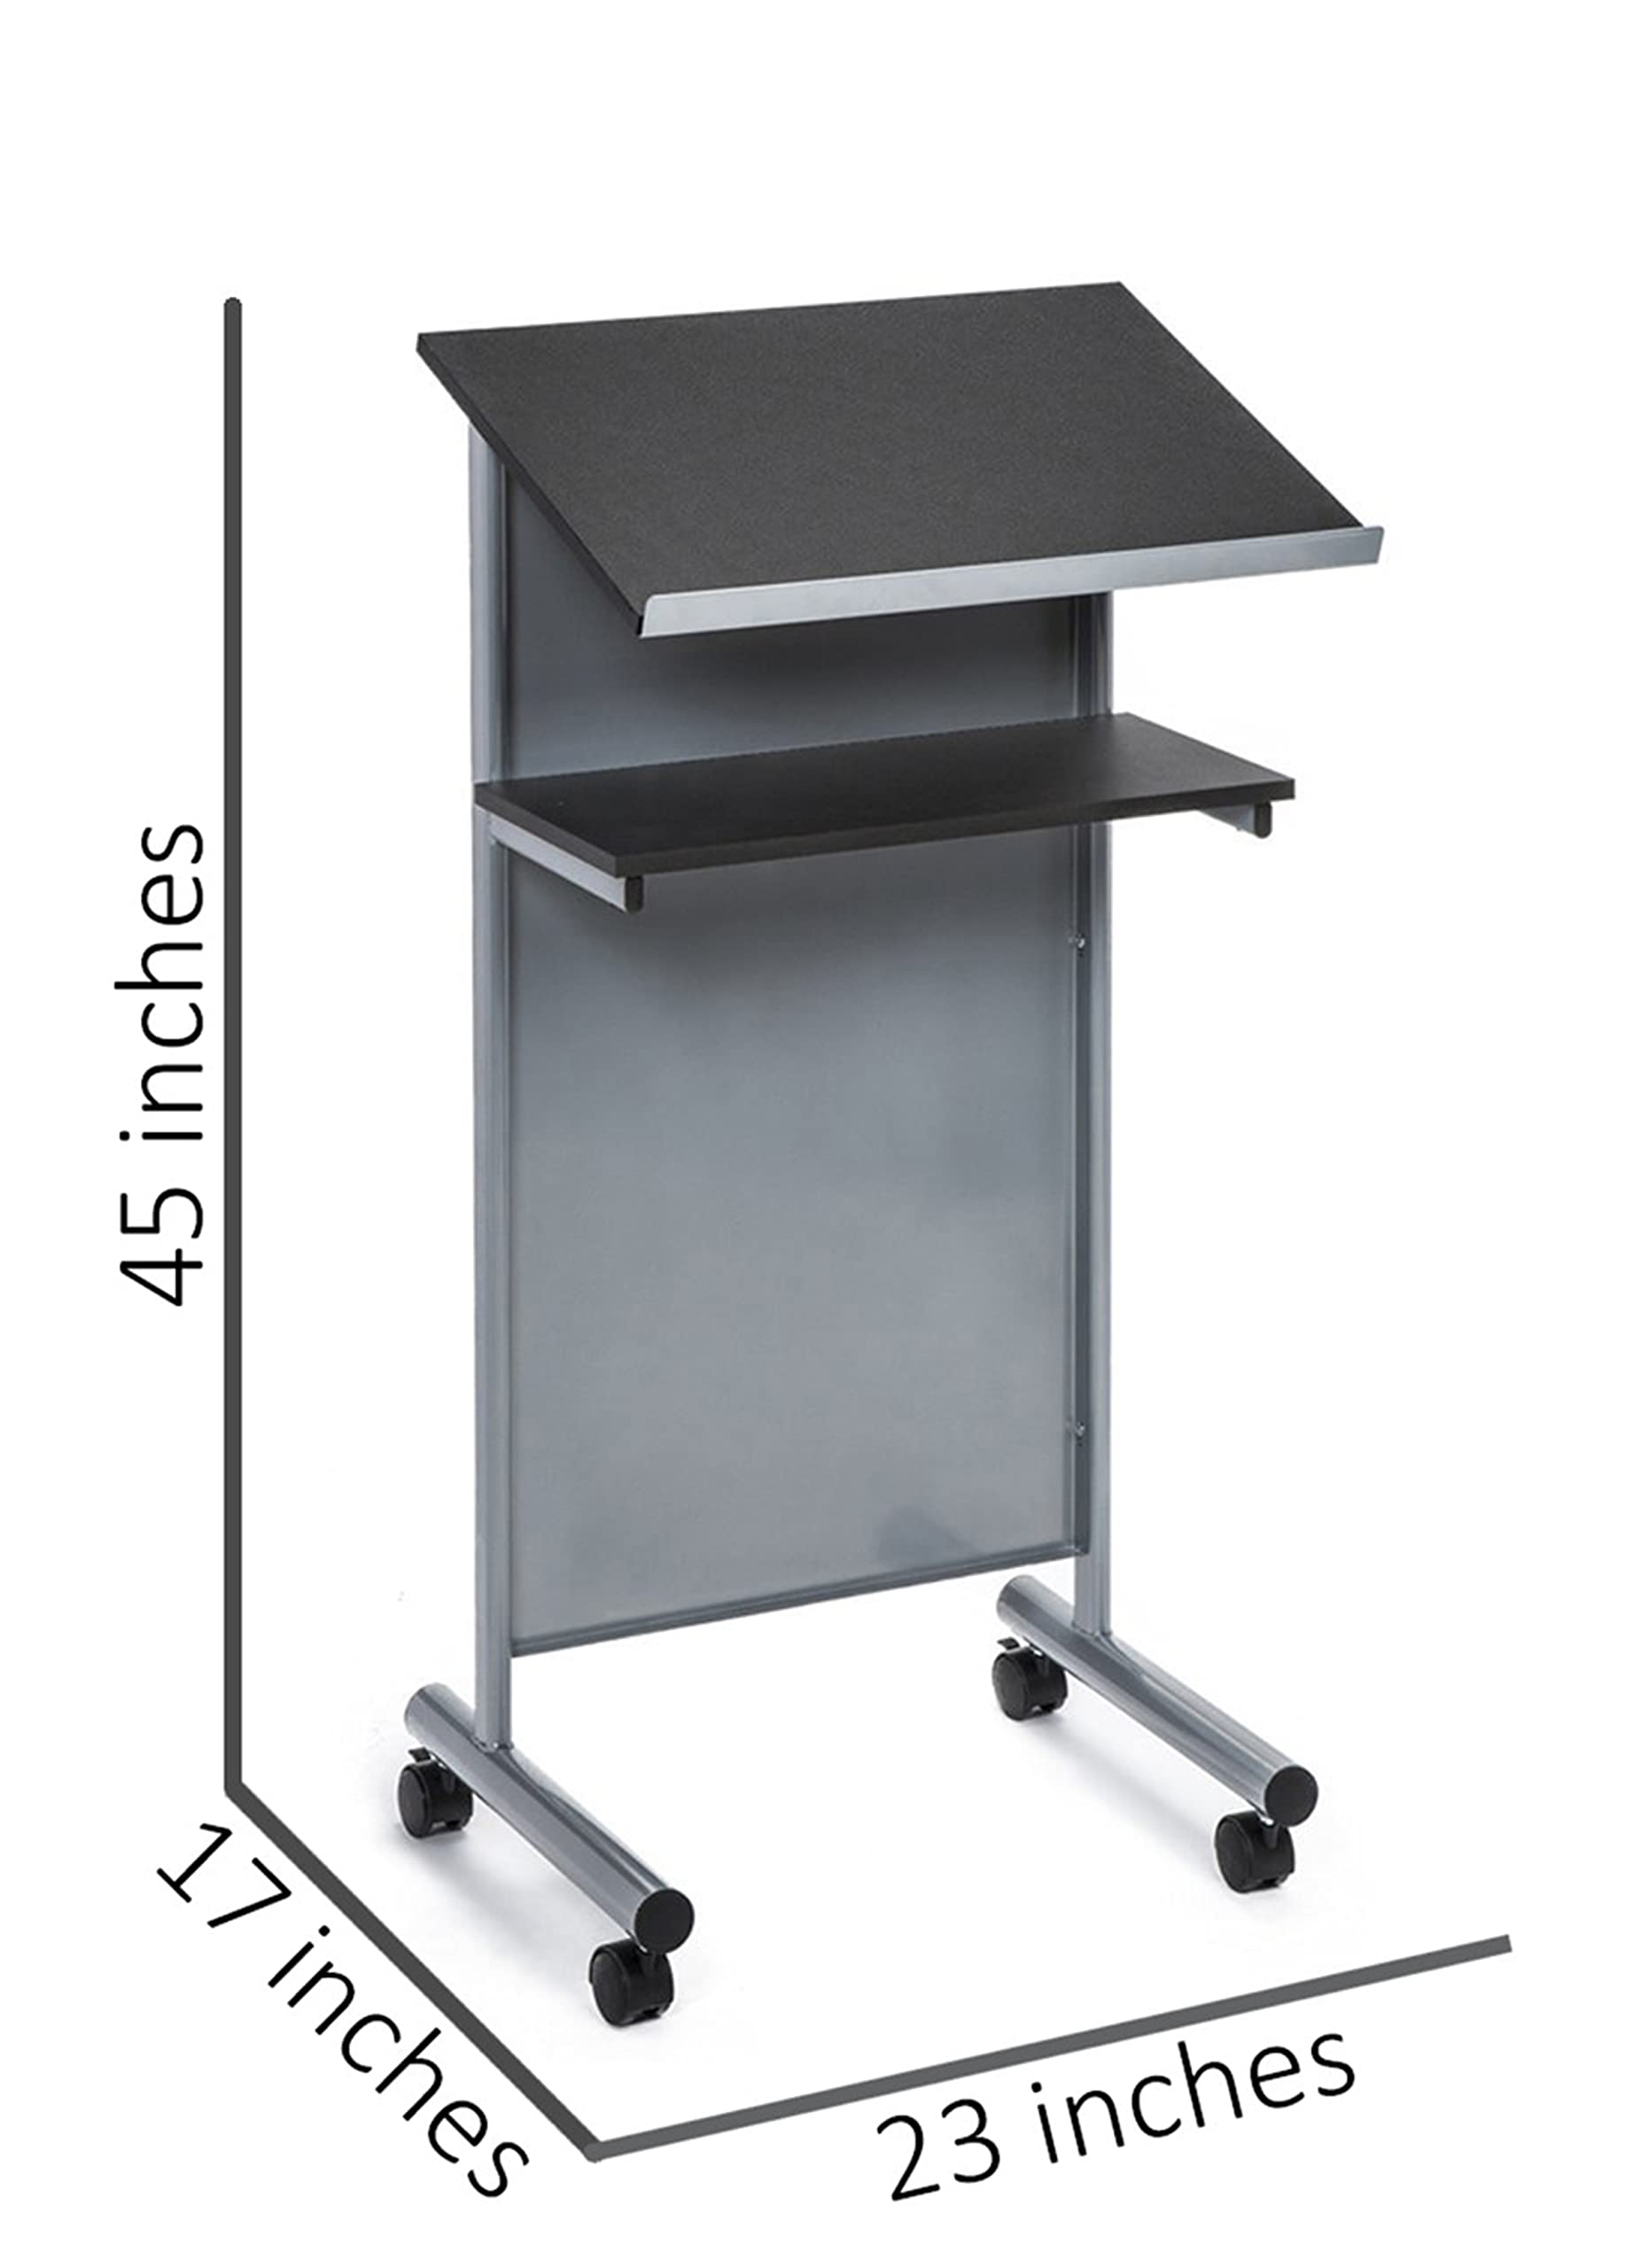 Audio-Visual Direct Wheeled Lectern Podium - Standing Desk with Storage Shelf - Silver/Black - Ideal for Presentations and Laptop Use